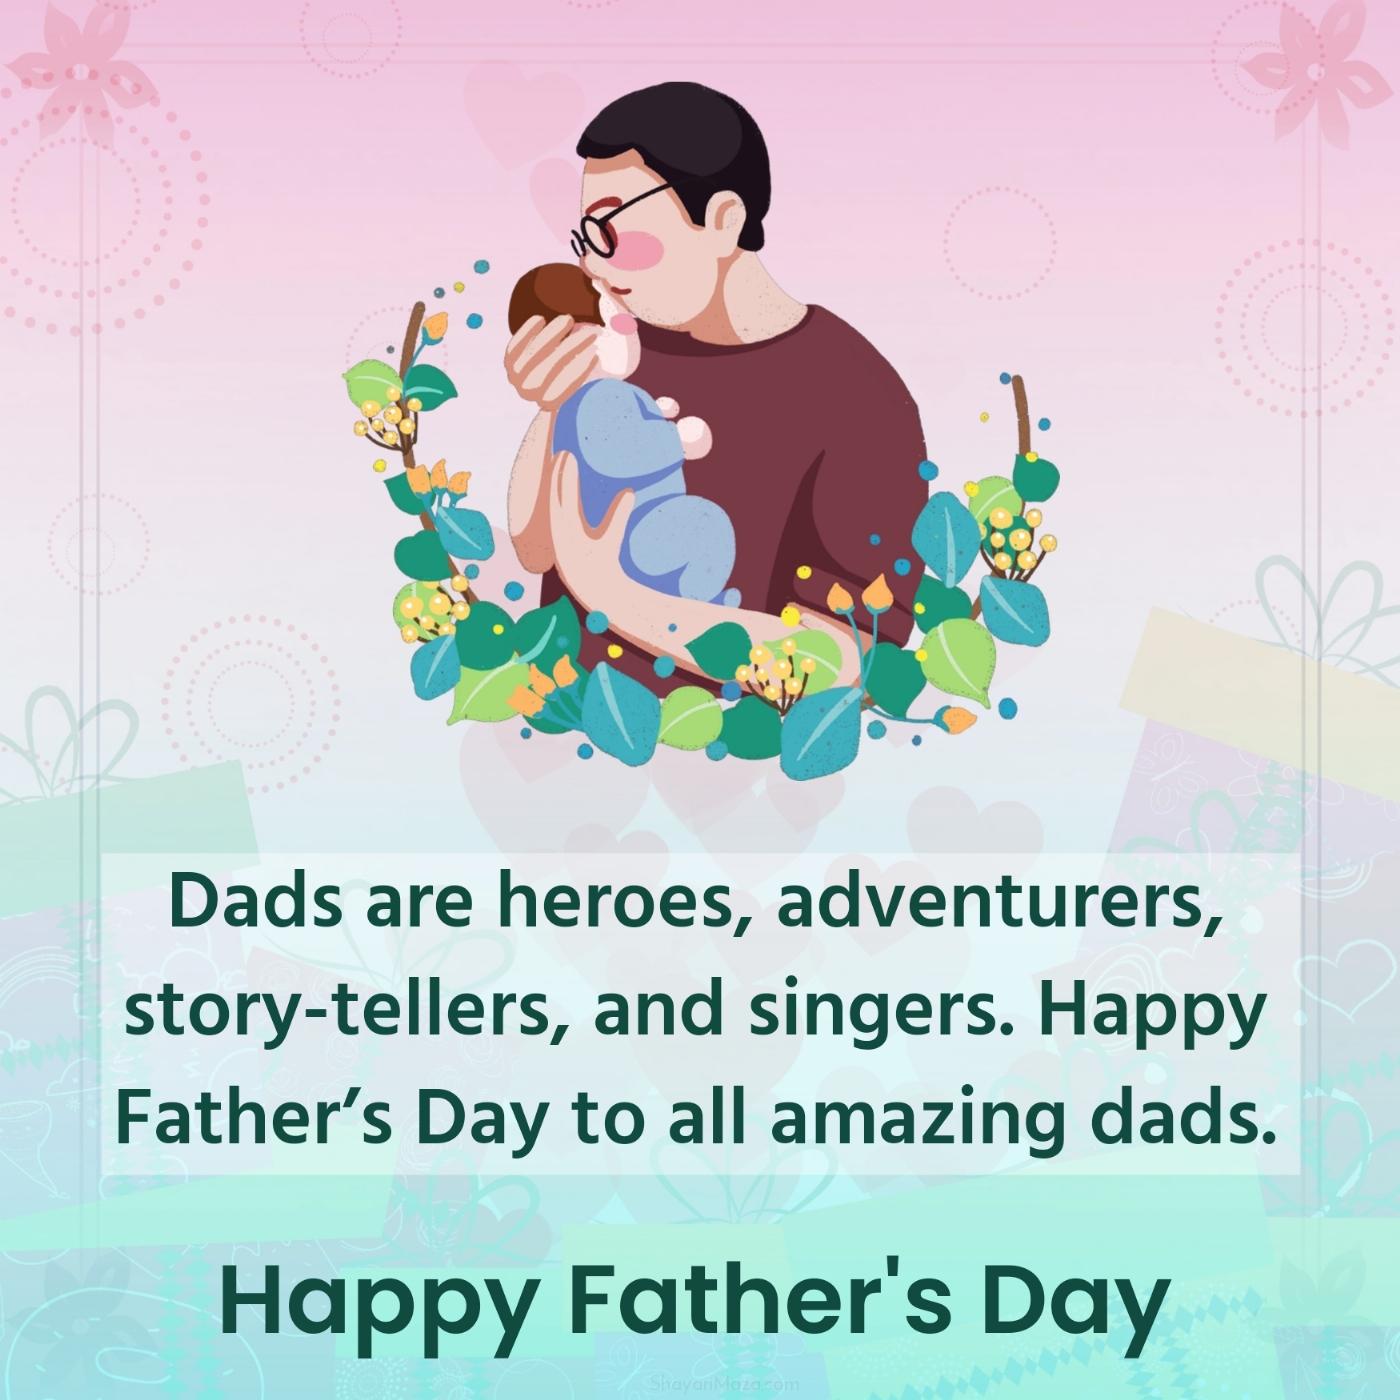 Dads are heroes adventurers story-tellers and singers